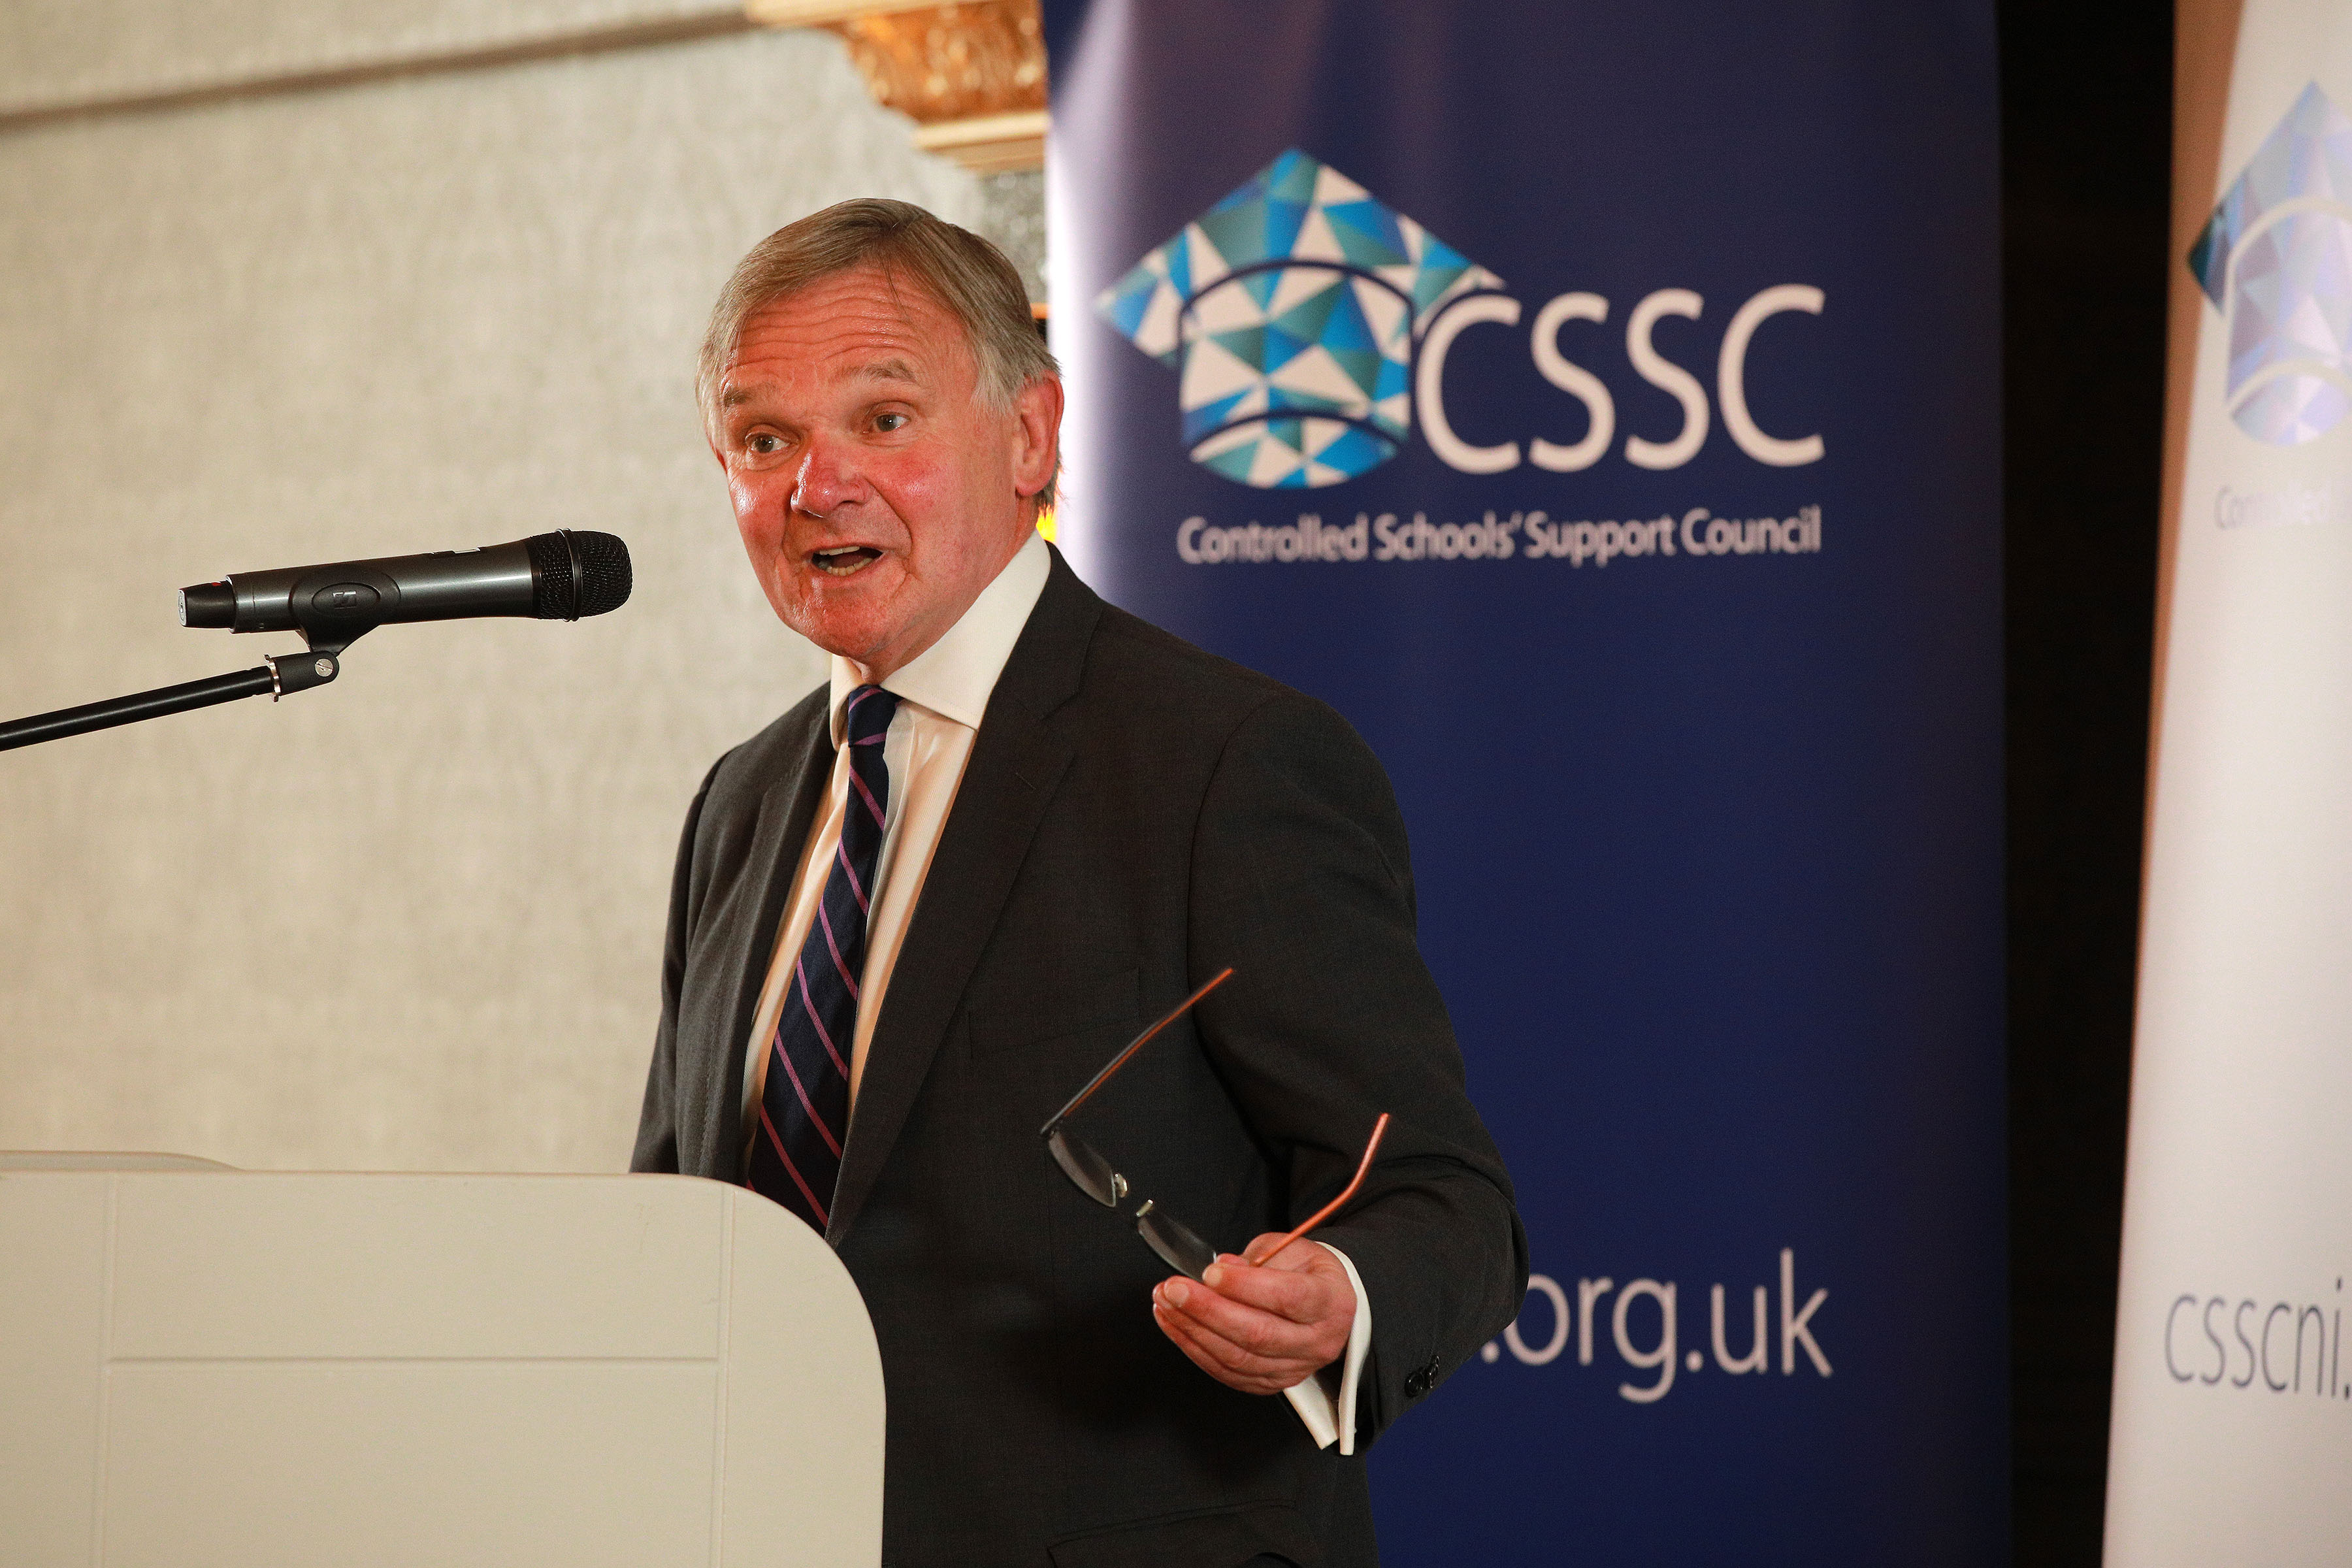 Mark Orr Chair CSSC speaking at AGM 2019